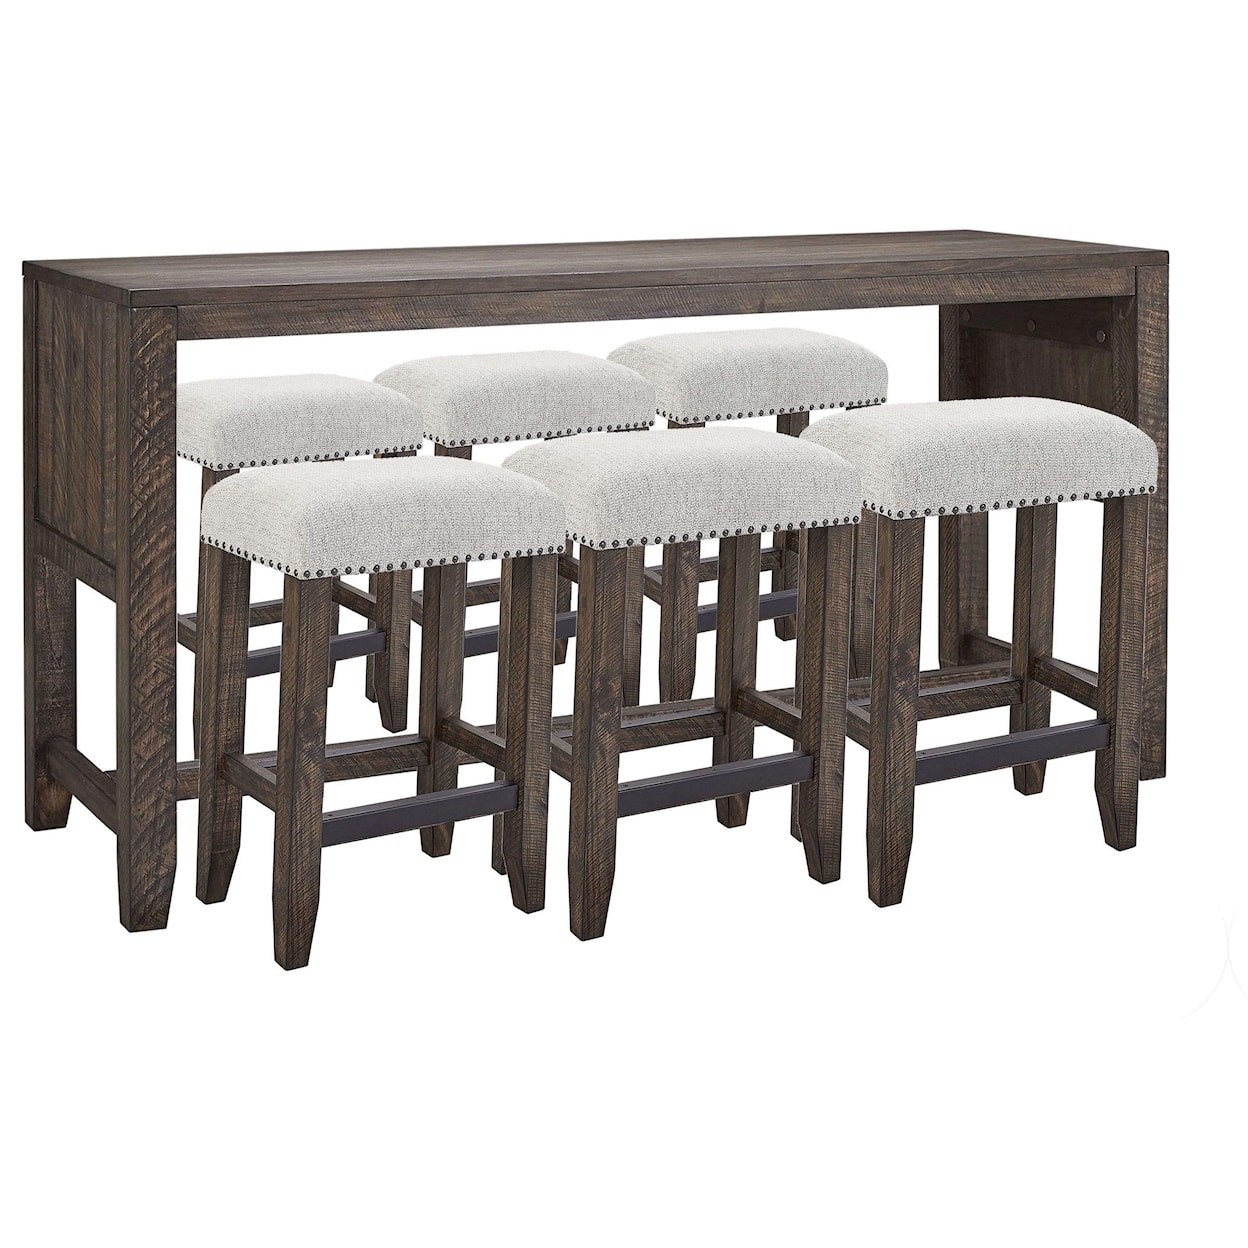 Parker House Eliza Everywhere Console with 3 Stools